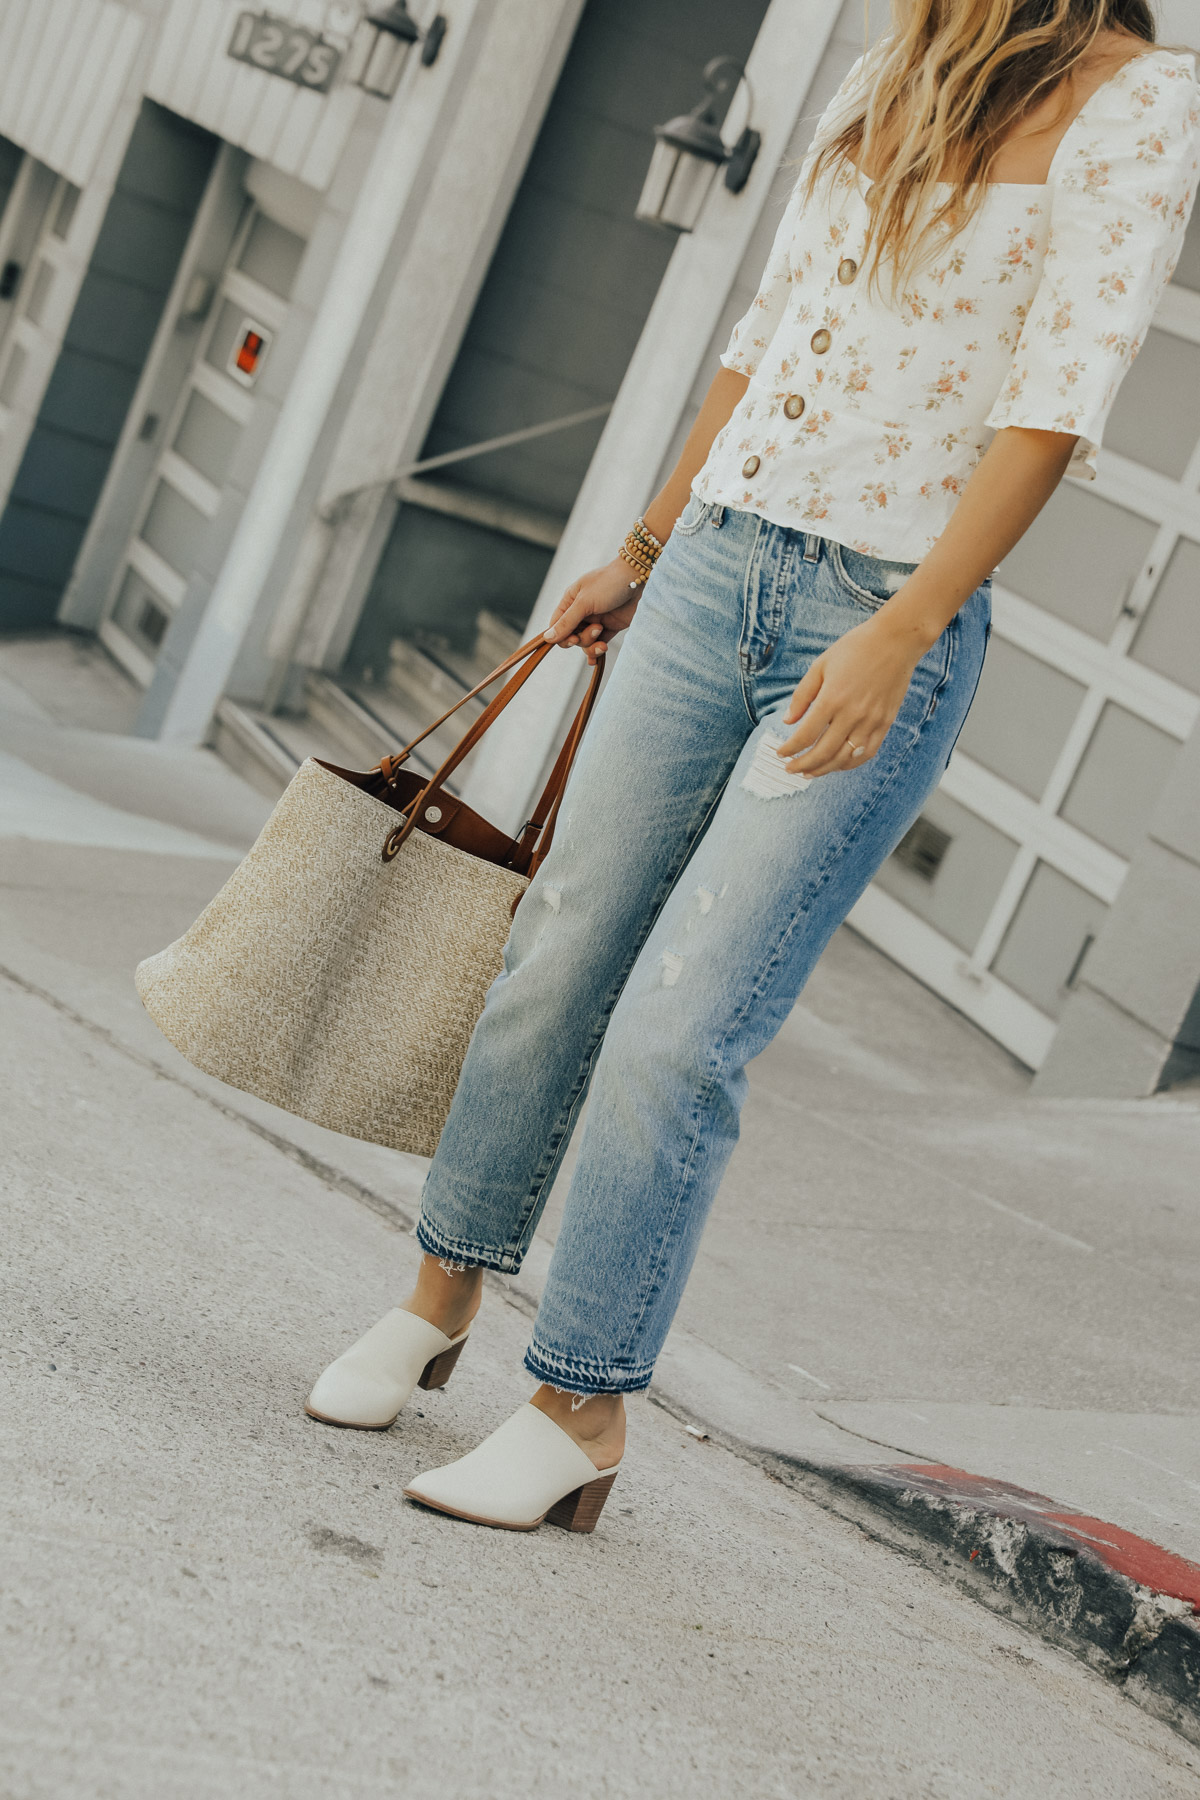 madewell vintage jeans and mules with reformation floral top